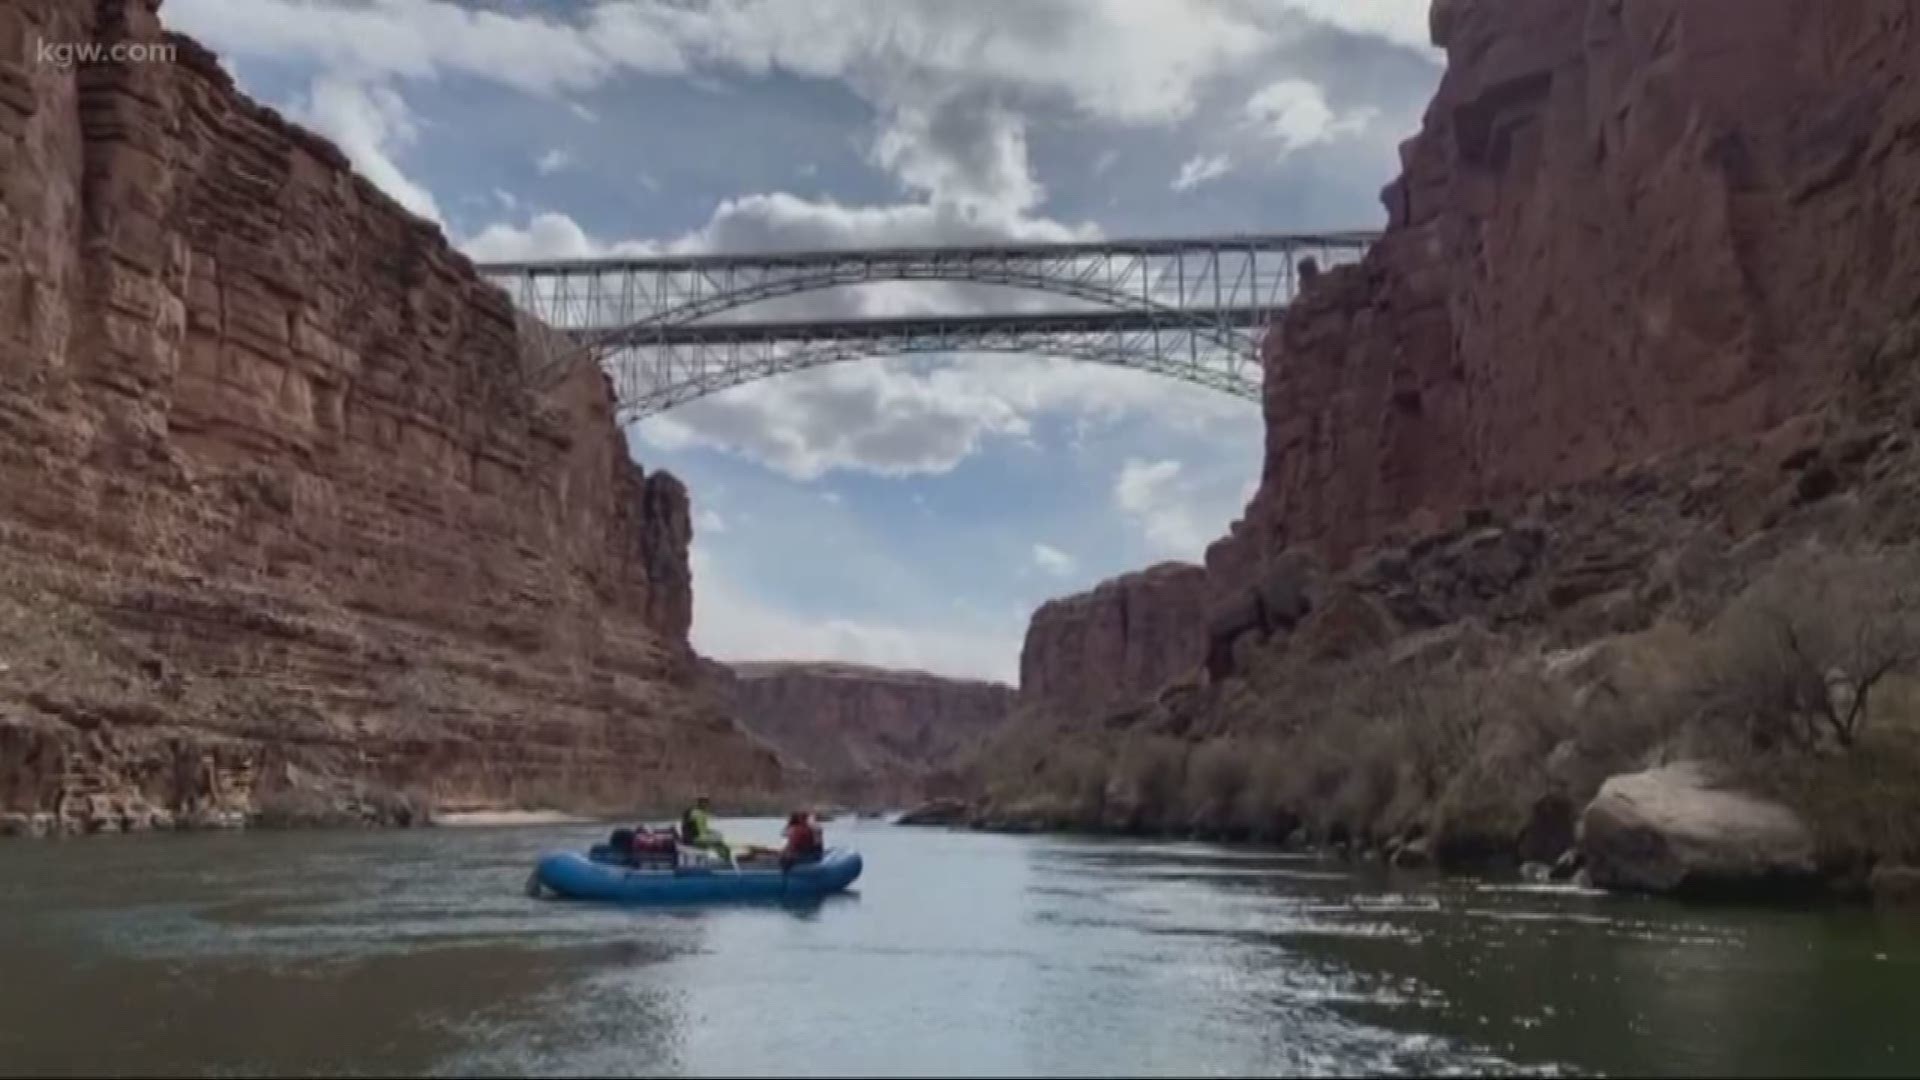 A Portland couple left for a rafting vacation in the Grand Canyon. They returned to an entirely different world.